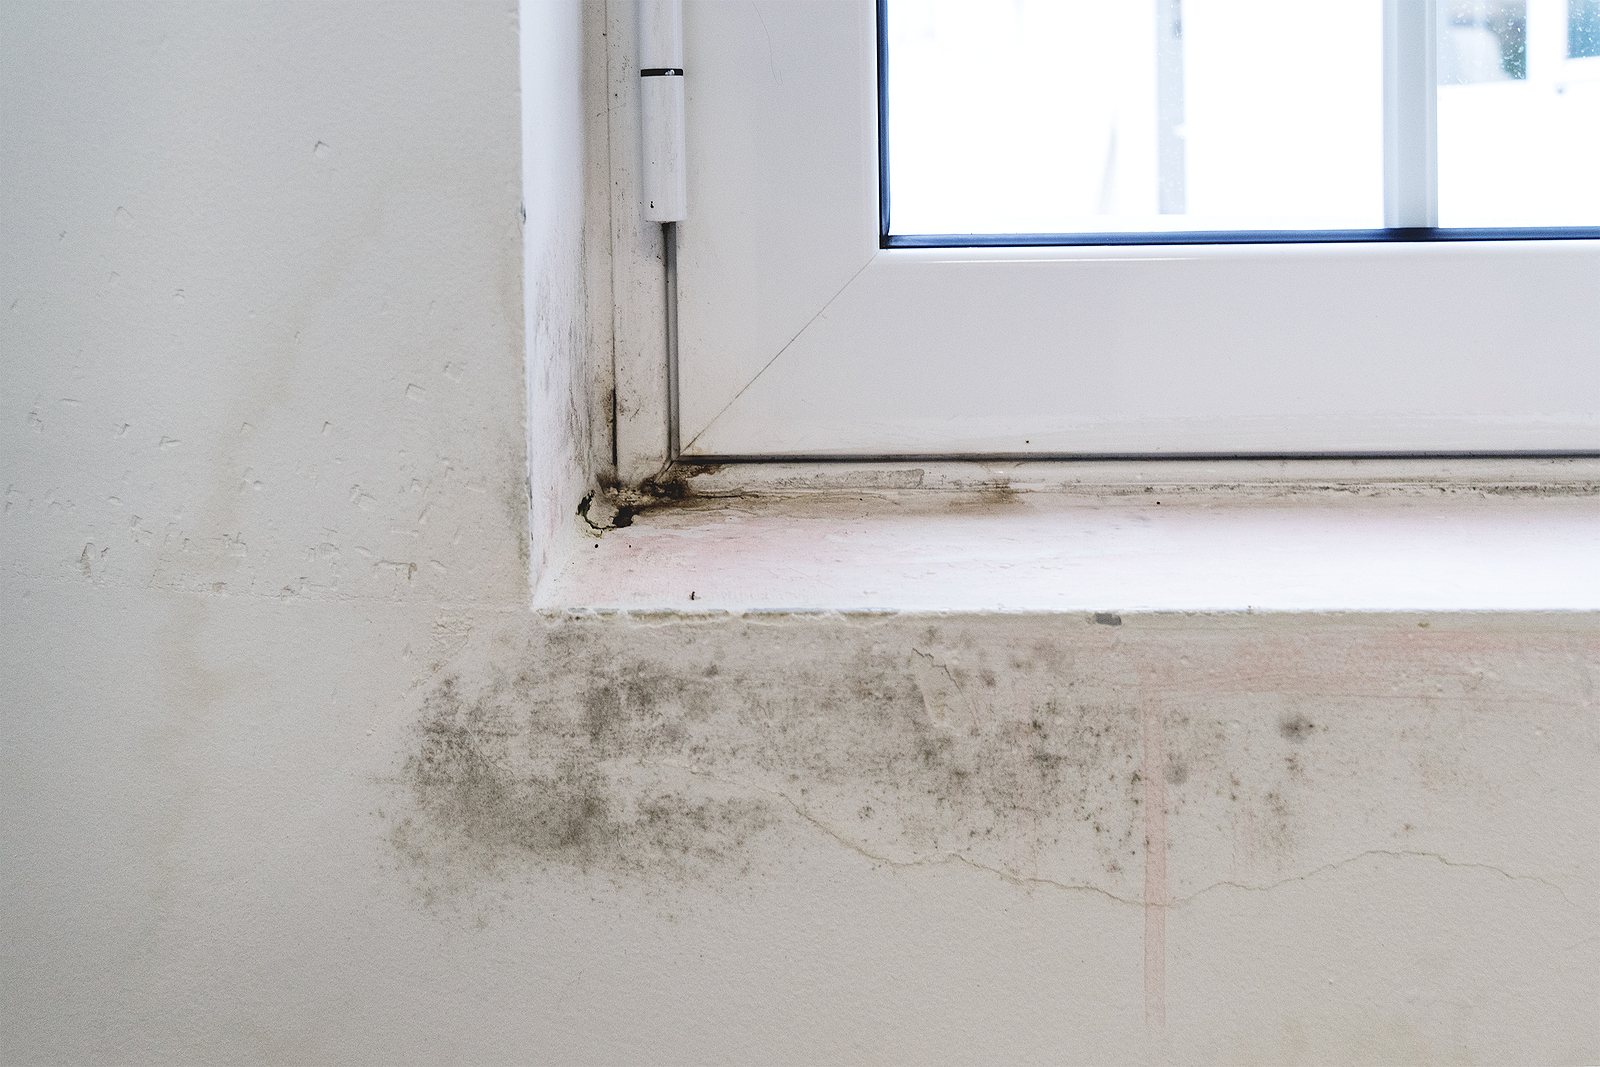 Black Mold On White Window Sill And Wall. Poor Ventilation, Humi